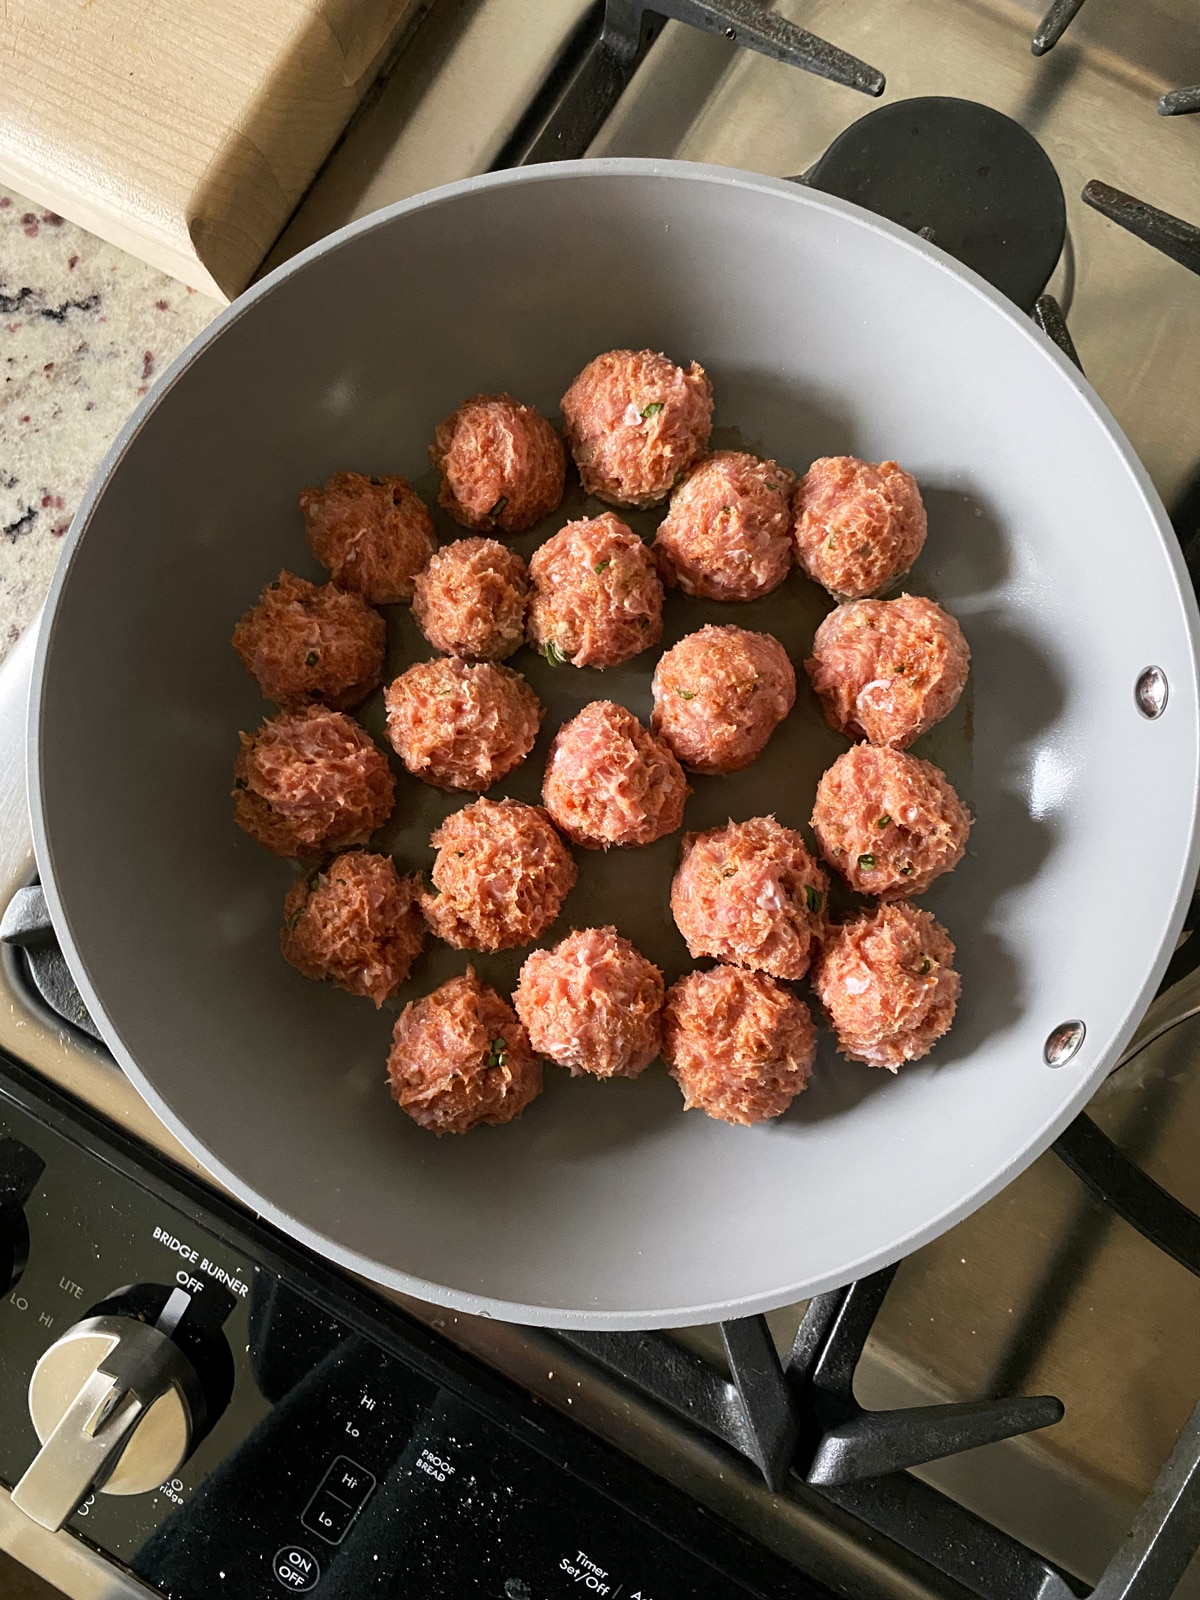 cooking turkey meatballs on the stovetop in a ceramic frying pan